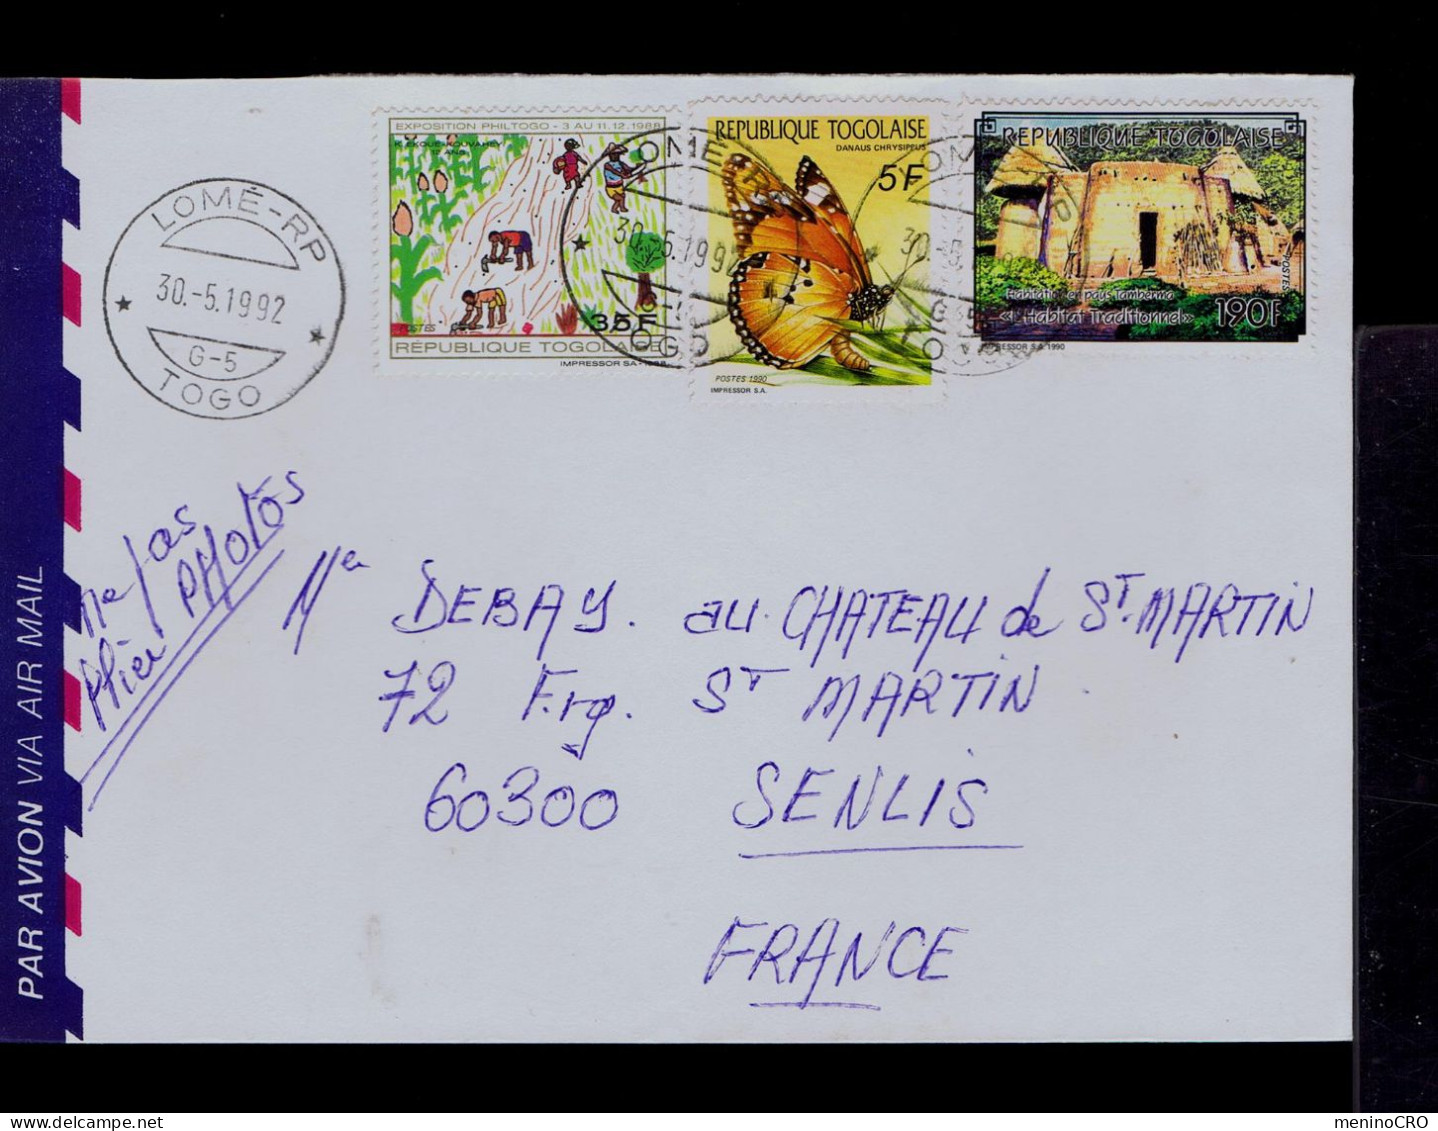 Gc8493 Rep. TOGOLAISE Butterflies Papillons Insectes Agriculture Typical Habitat Traditioneel  Mailed LOMÉ-RP »SENLIS - Landwirtschaft